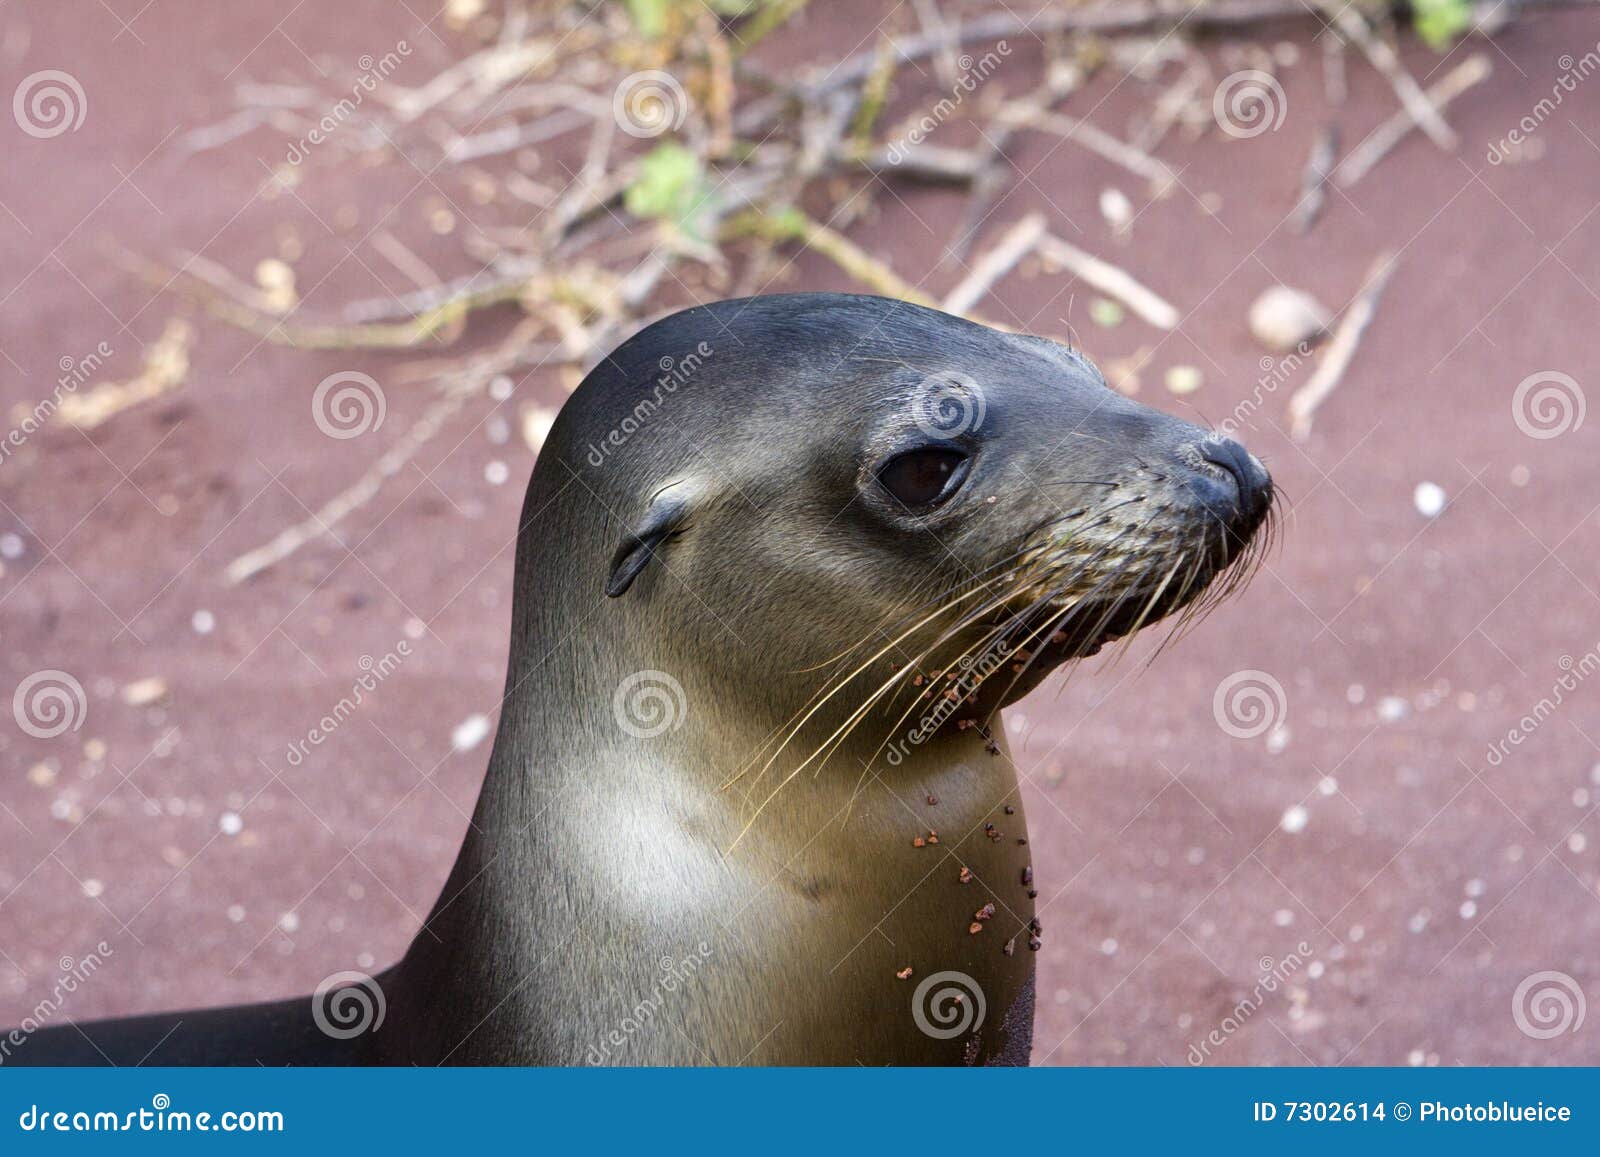 sealion in the galapagos islands